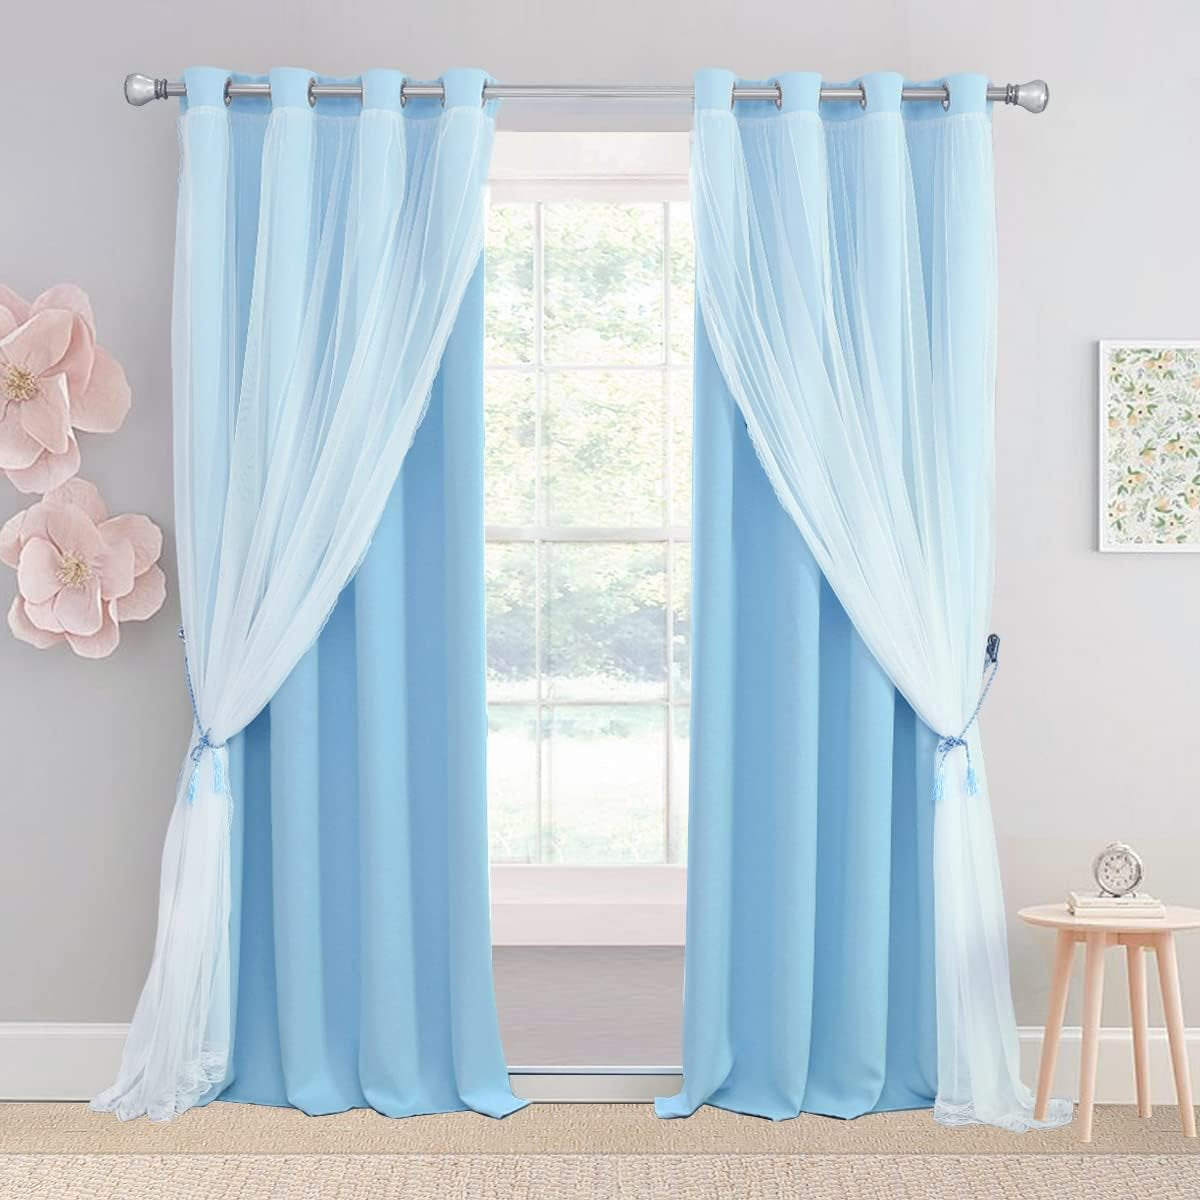 Pink Blackout Curtains 84 Inch Length - Double Layers Princess Girls Curtains & Draperies Panels for Kids Bedroom Living Room Nursery Pink Lace Hem Room Darkening Curtains, 2 Pcs  SOFJAGETQ Sky Blue 52 X 96 